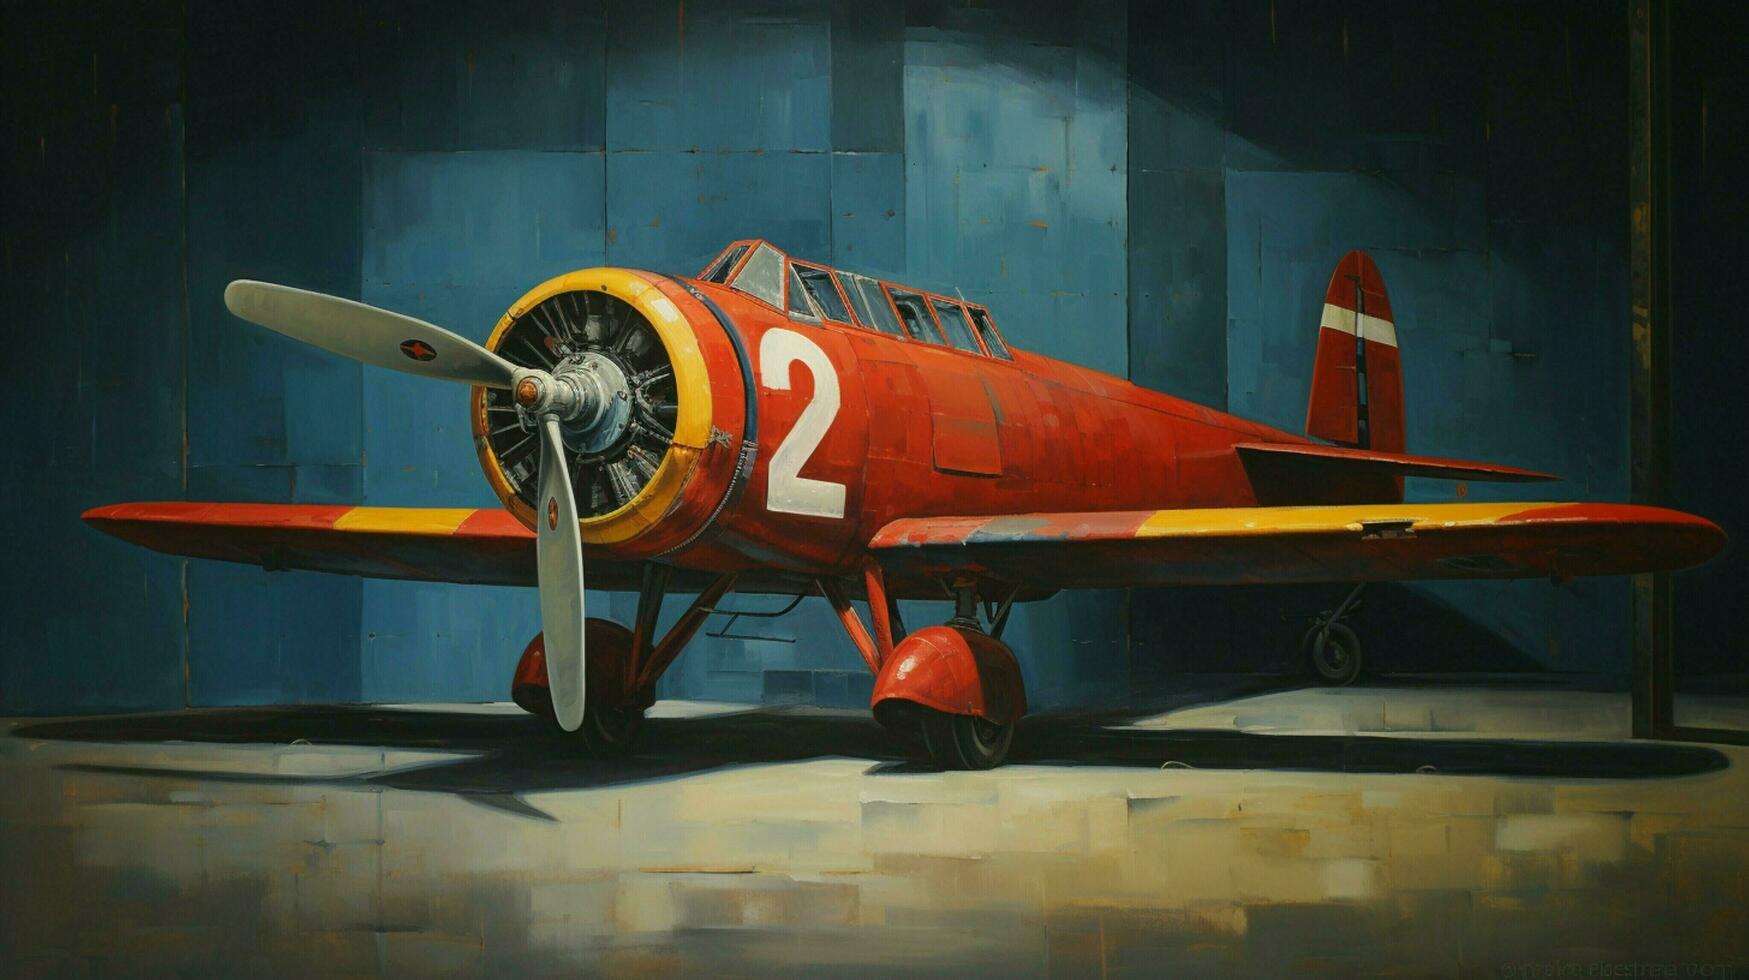 a painting of a plane with the number 2 on it photo